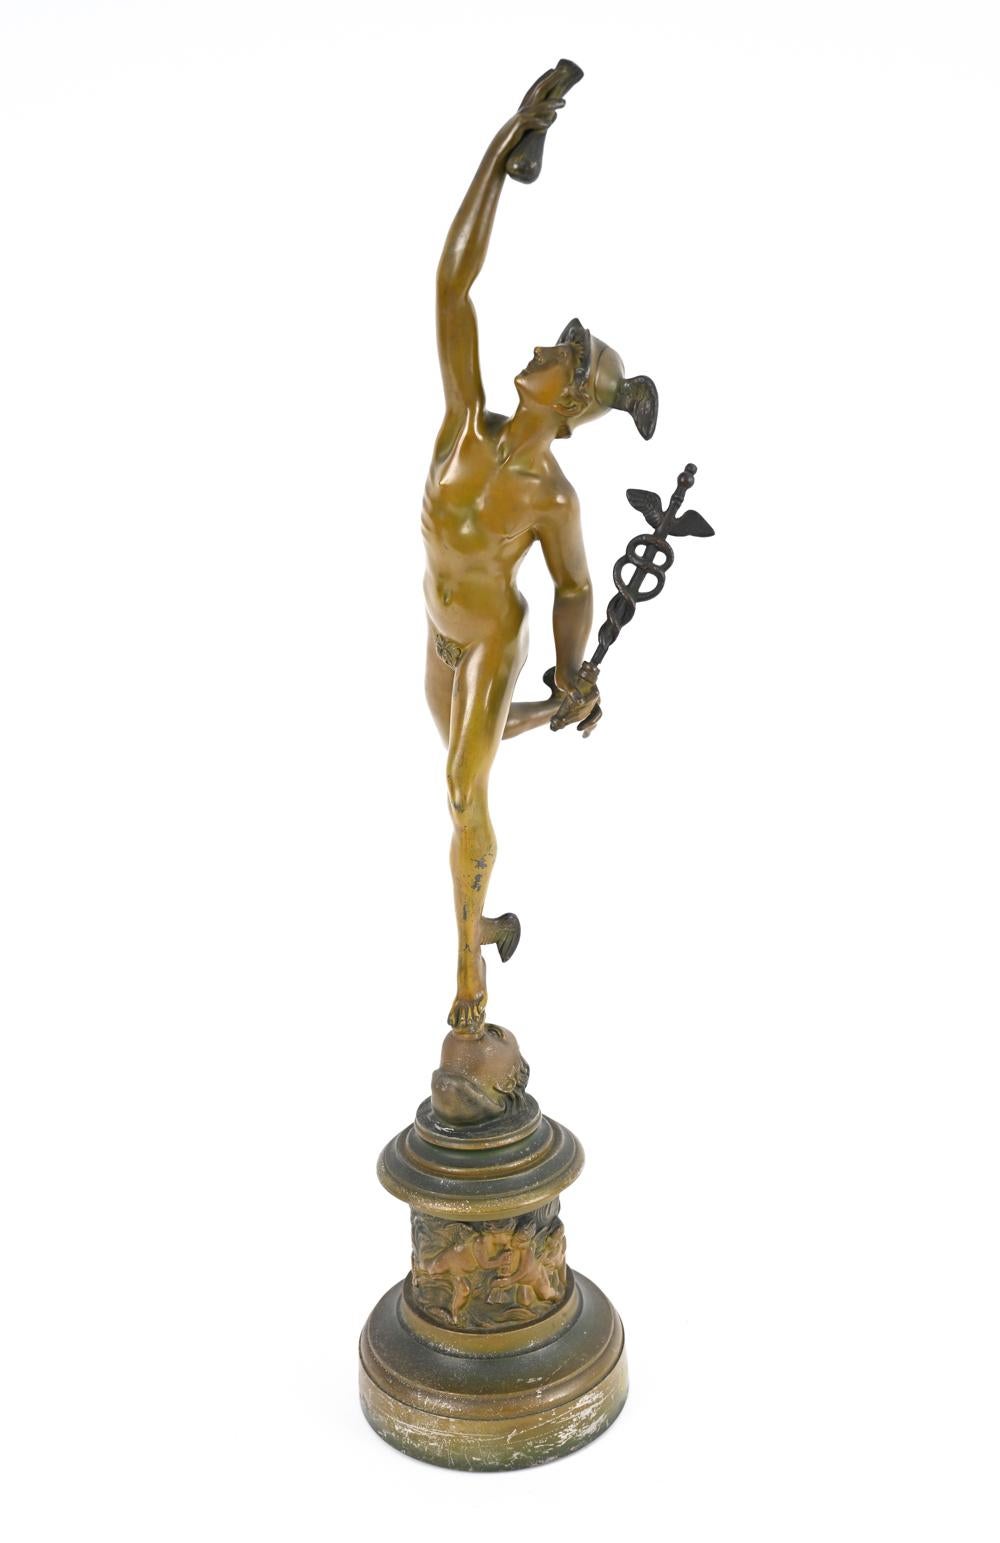 19th C. spelter sculpture. Unsigned.